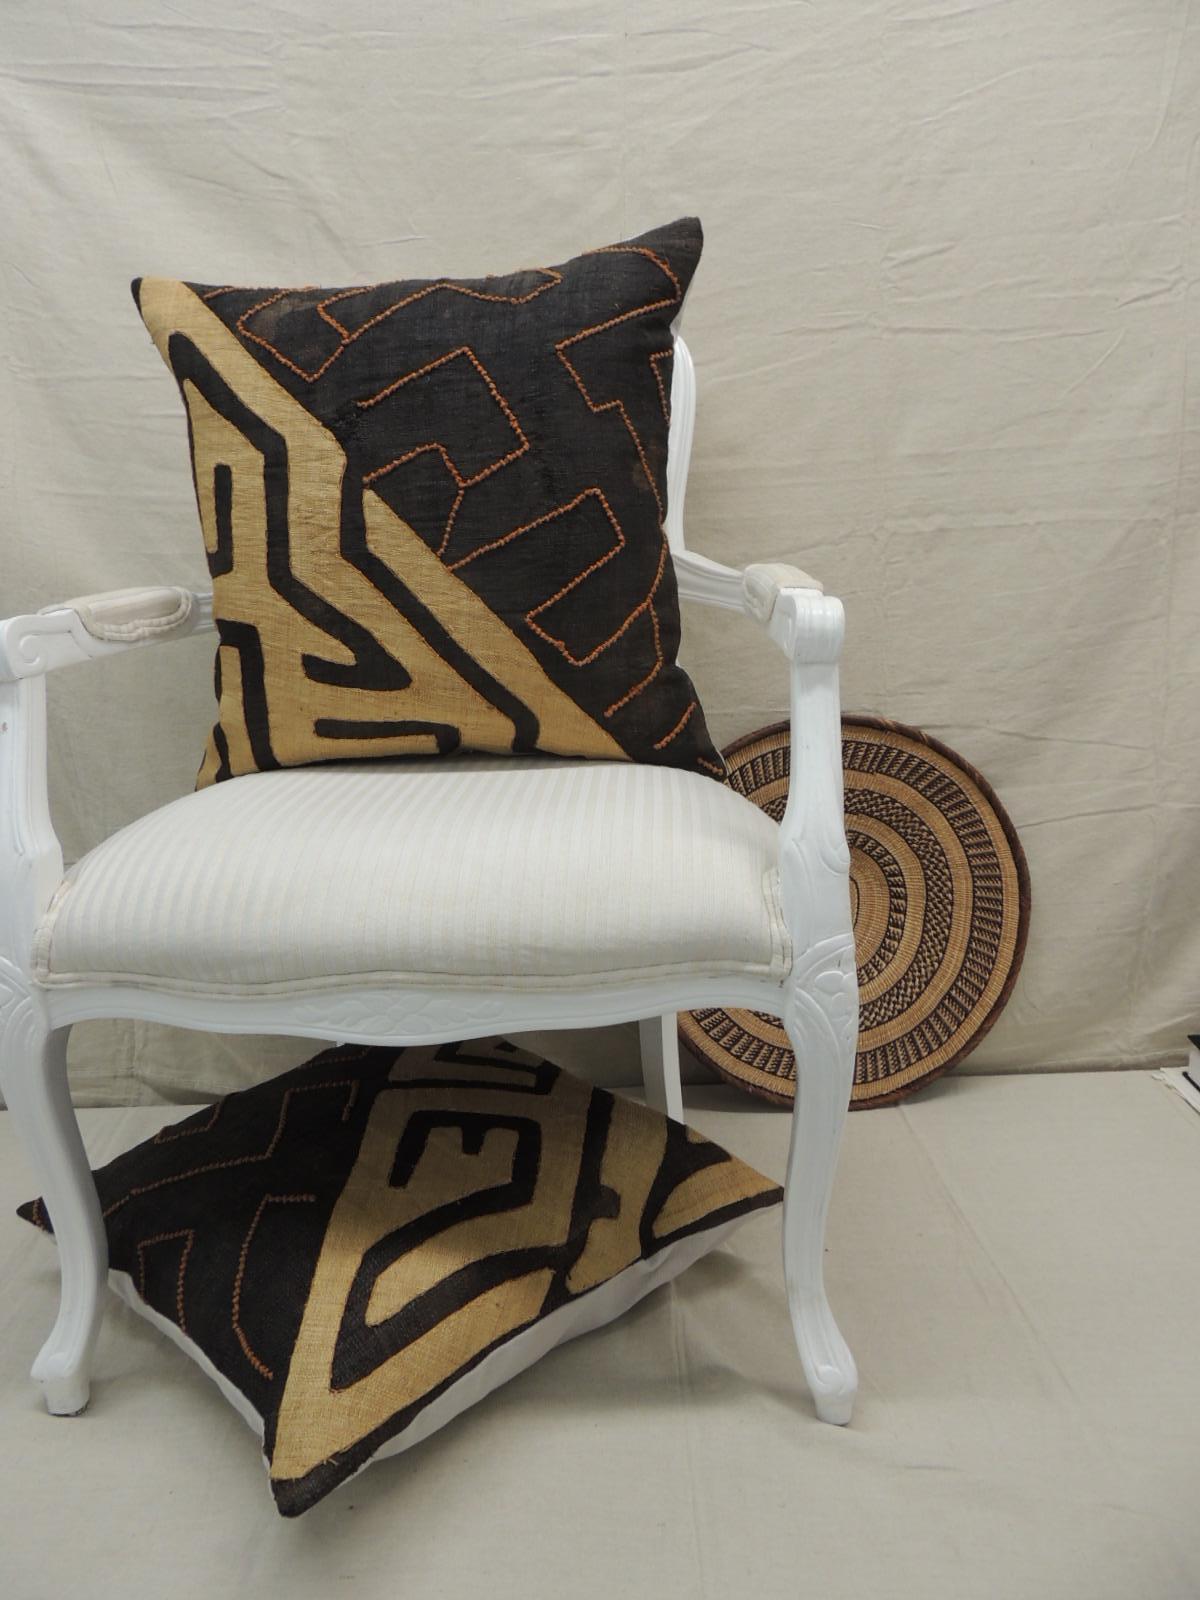 Hand-Crafted Vintage Kuba Orange and Black Handwoven Patchwork African Decorative Pillow